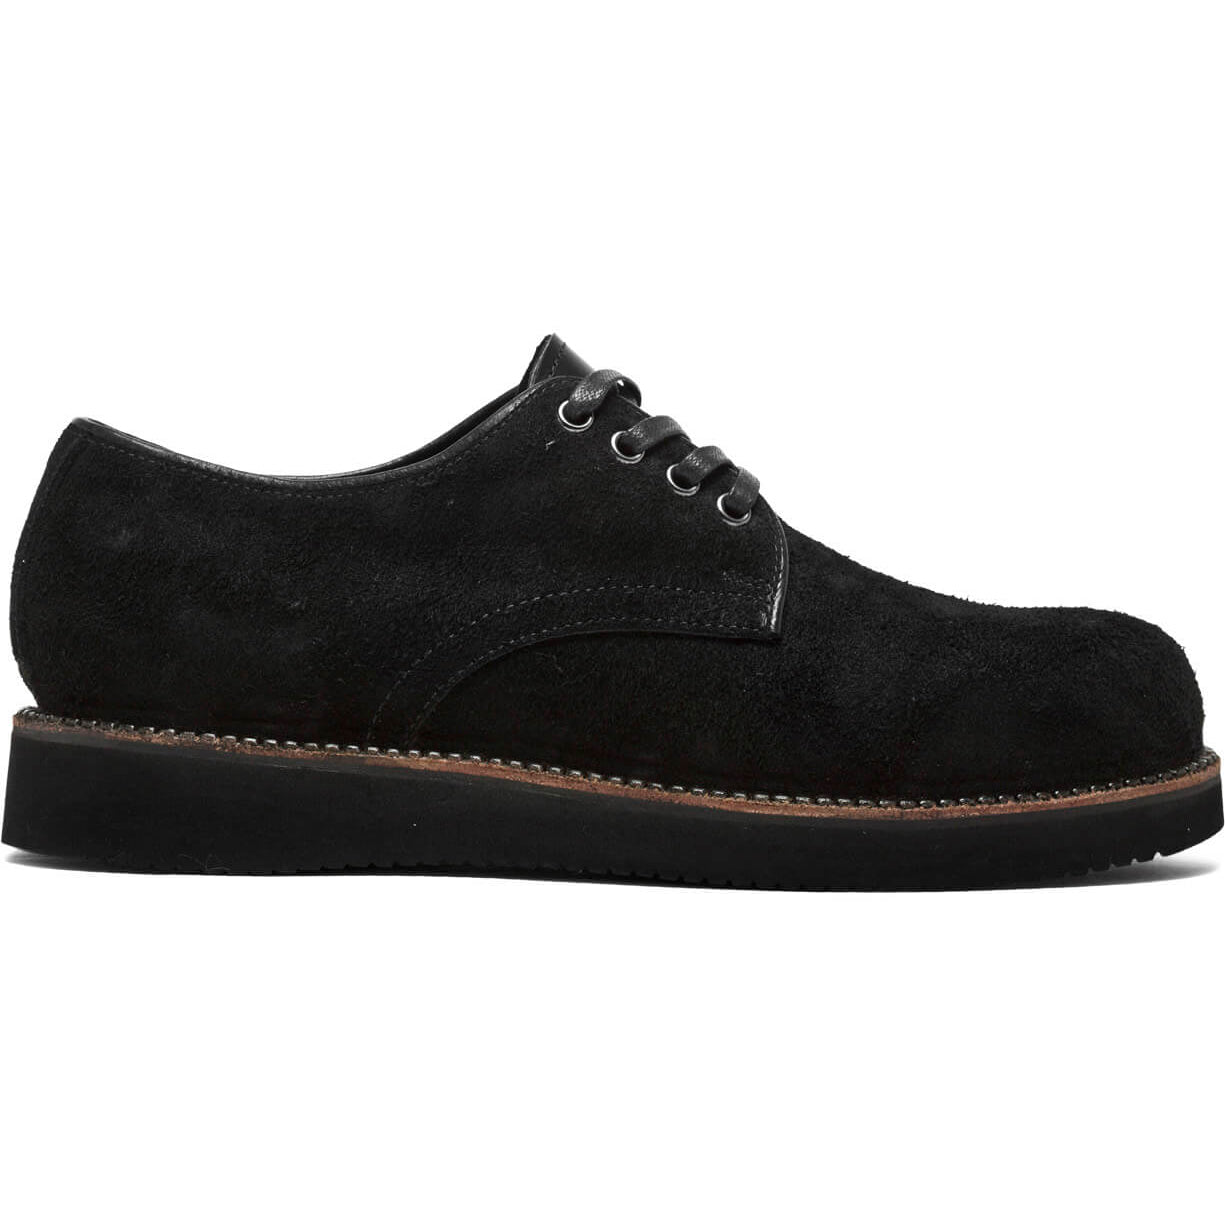 A men's black suede oxford shoe, the Michael II by Broken Homme, featuring pinpoint construction details on full grain leather uppers, set against a white background.